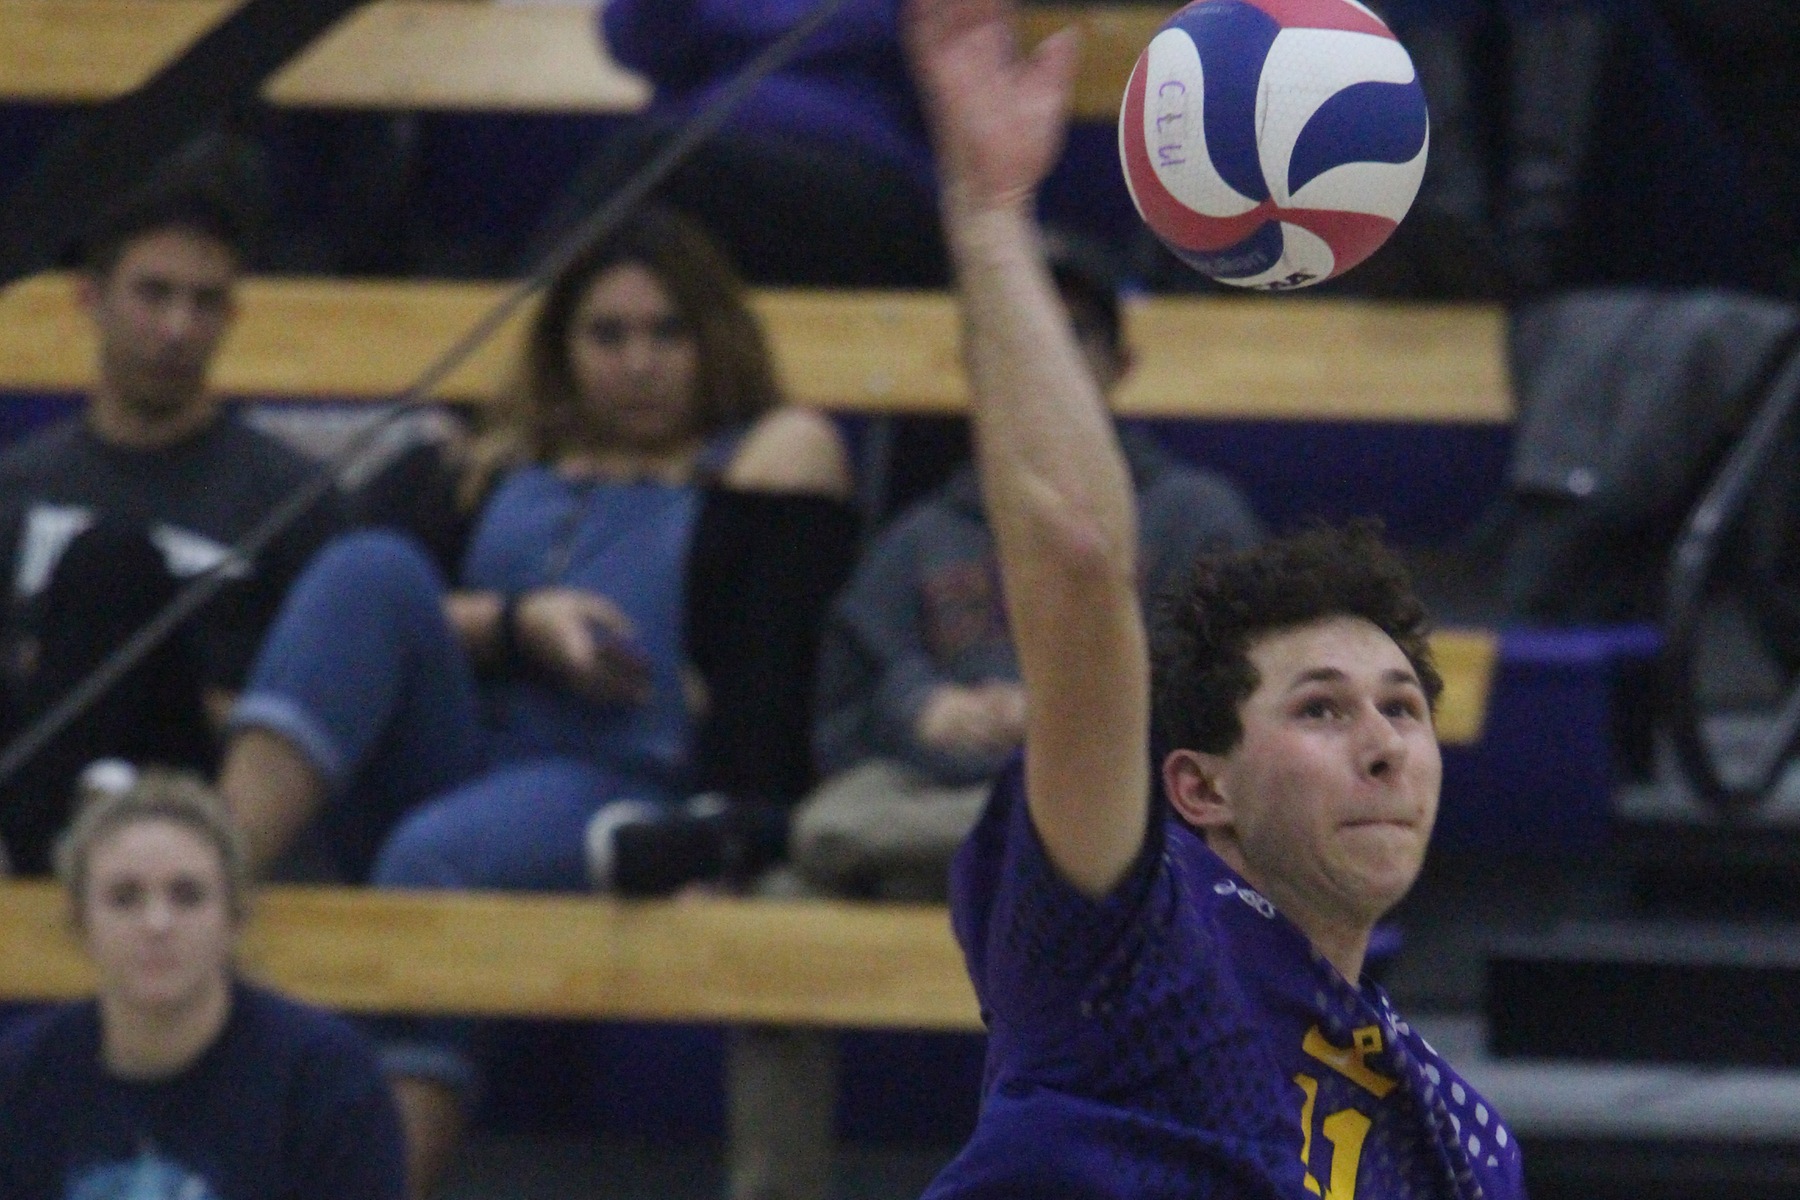 Justin Dietrich tallied a season-high for kills (11) and hitting percentage (.688) against No. 3 Carthage.